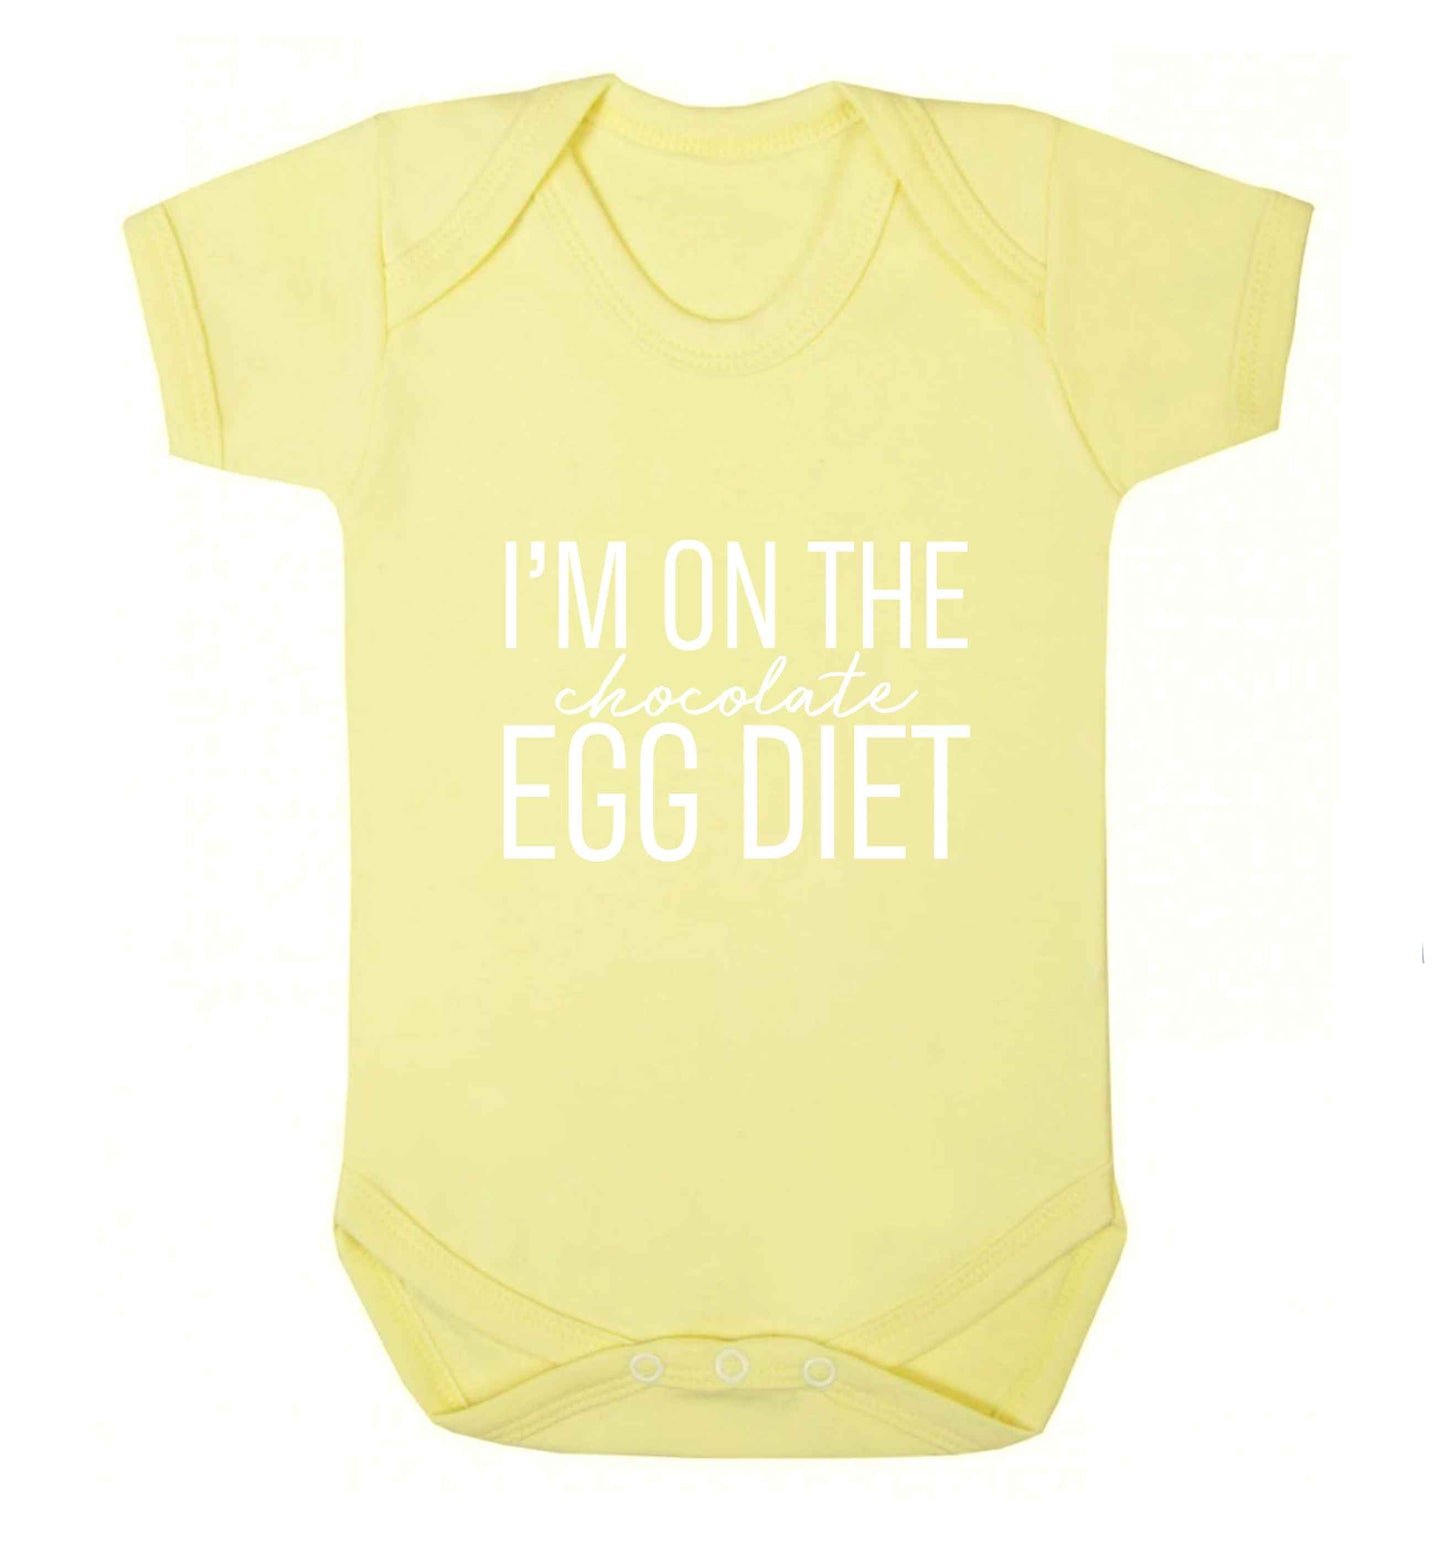 I'm on the chocolate egg diet baby vest pale yellow 18-24 months